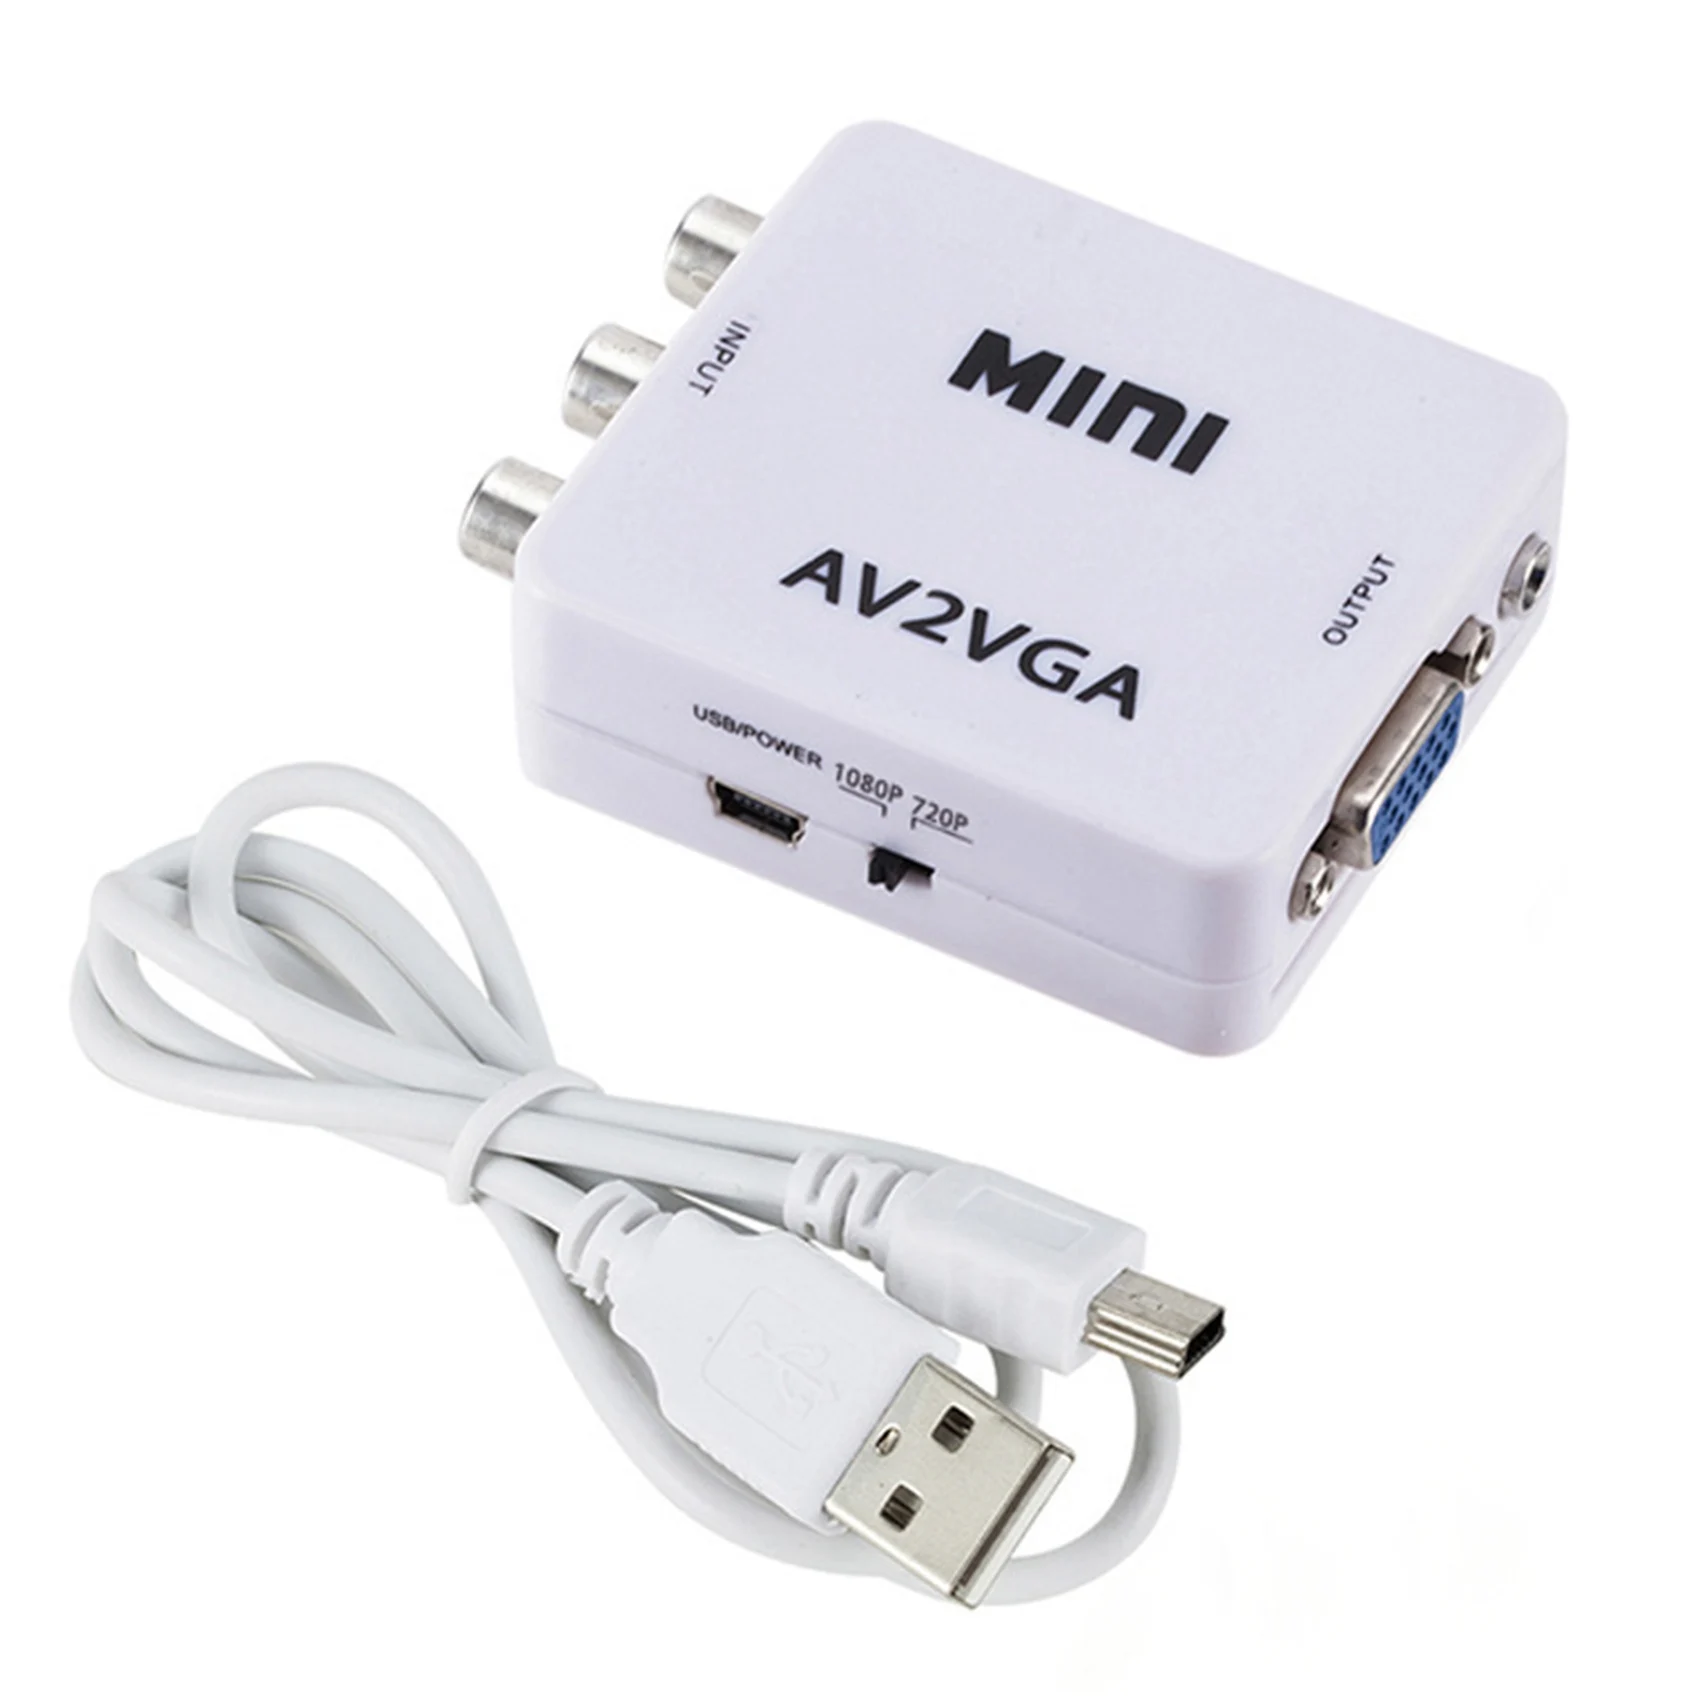 

AV (RCA) to VGA Audio Video Converter,Support Resolution 1080P /720P,With 3.5 mm AUDIO Audio Input Port,for STB TV PC